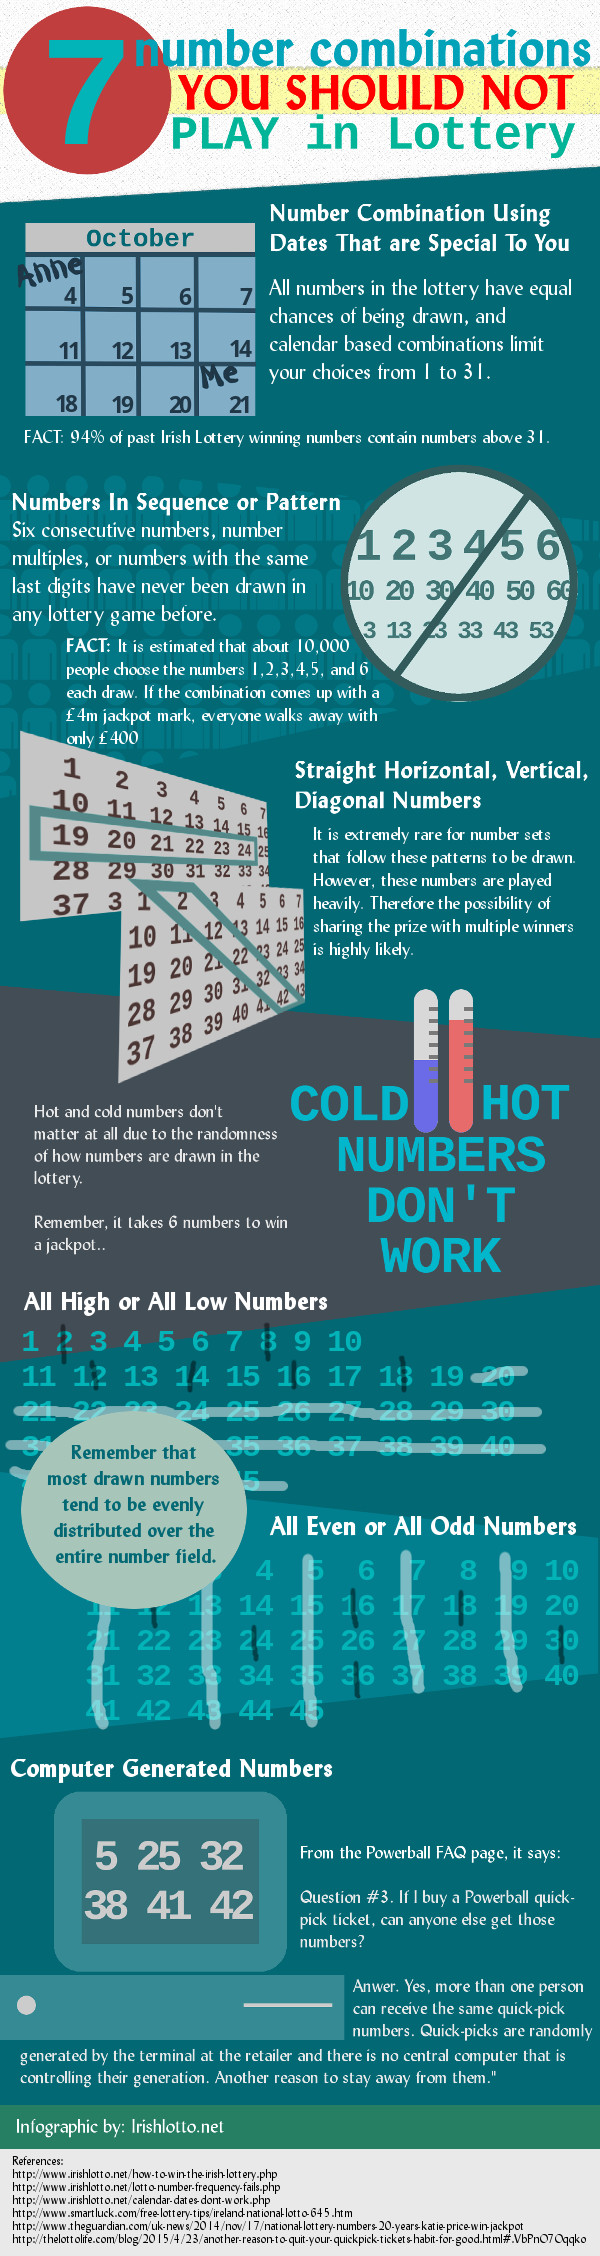 Infographic: 7 numbers you should not play in lottery